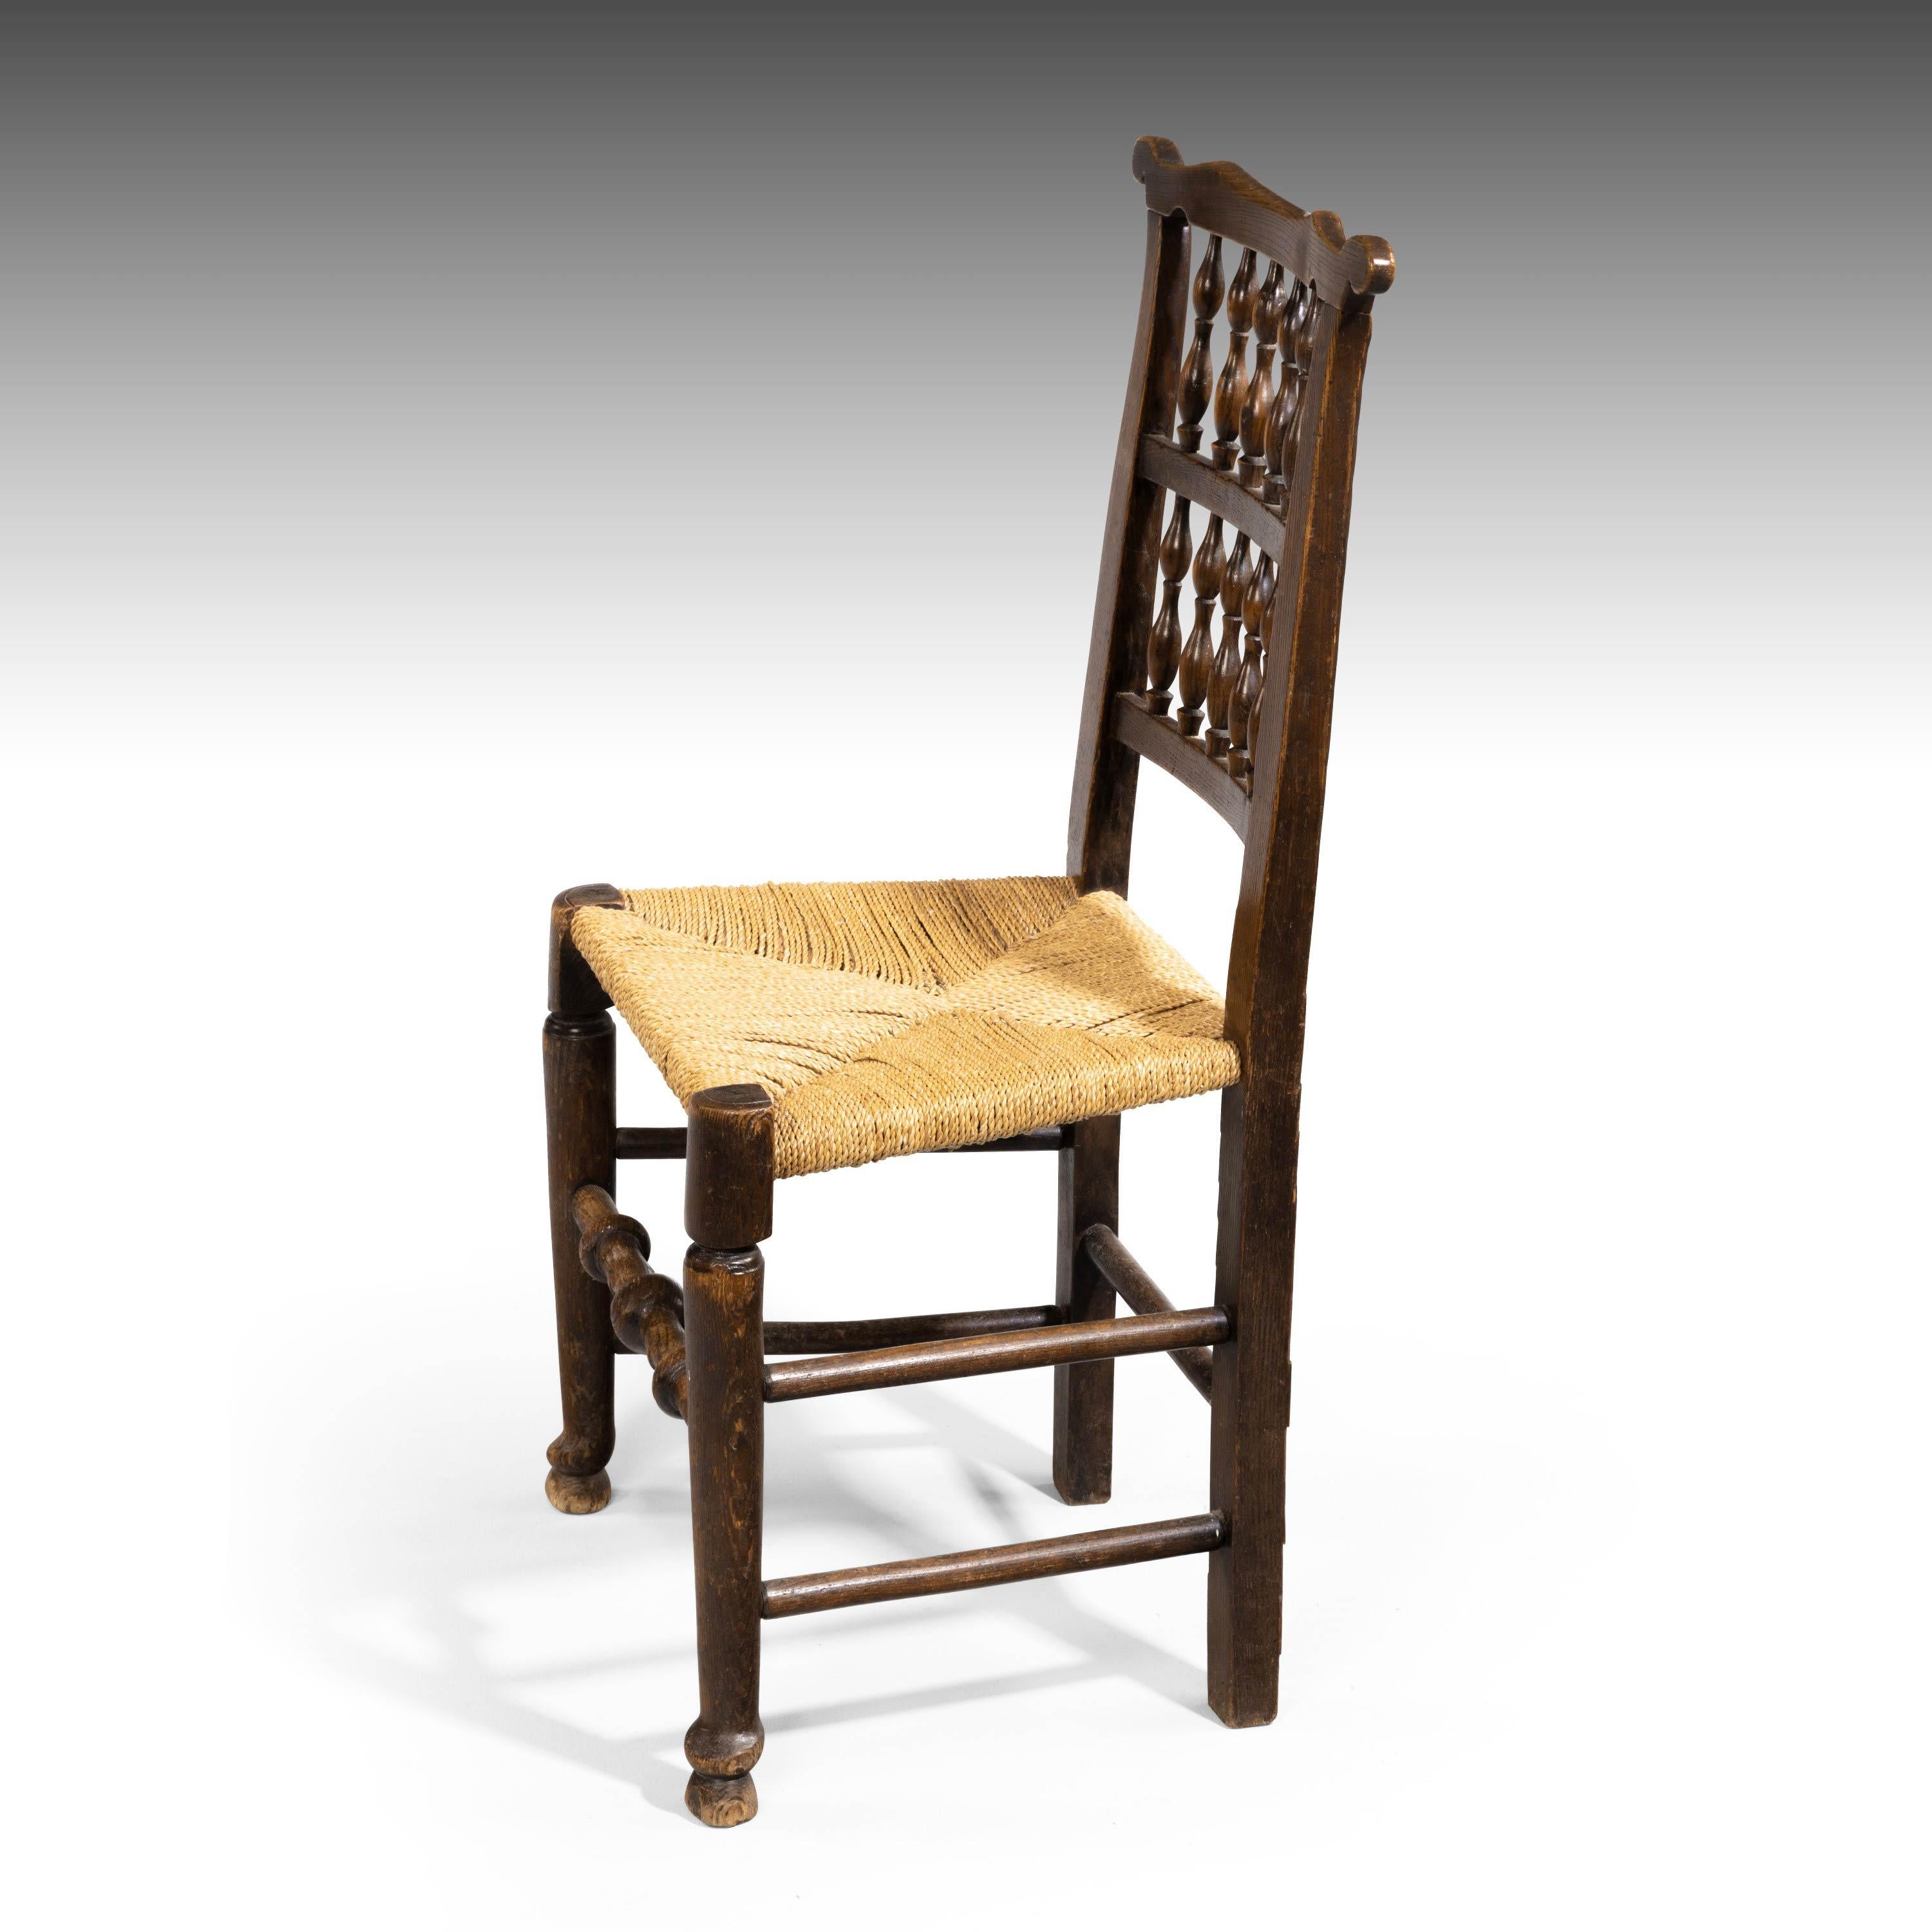 Attractive Mid-19th Century Elm Spindleback Chair In Good Condition In Peterborough, Northamptonshire